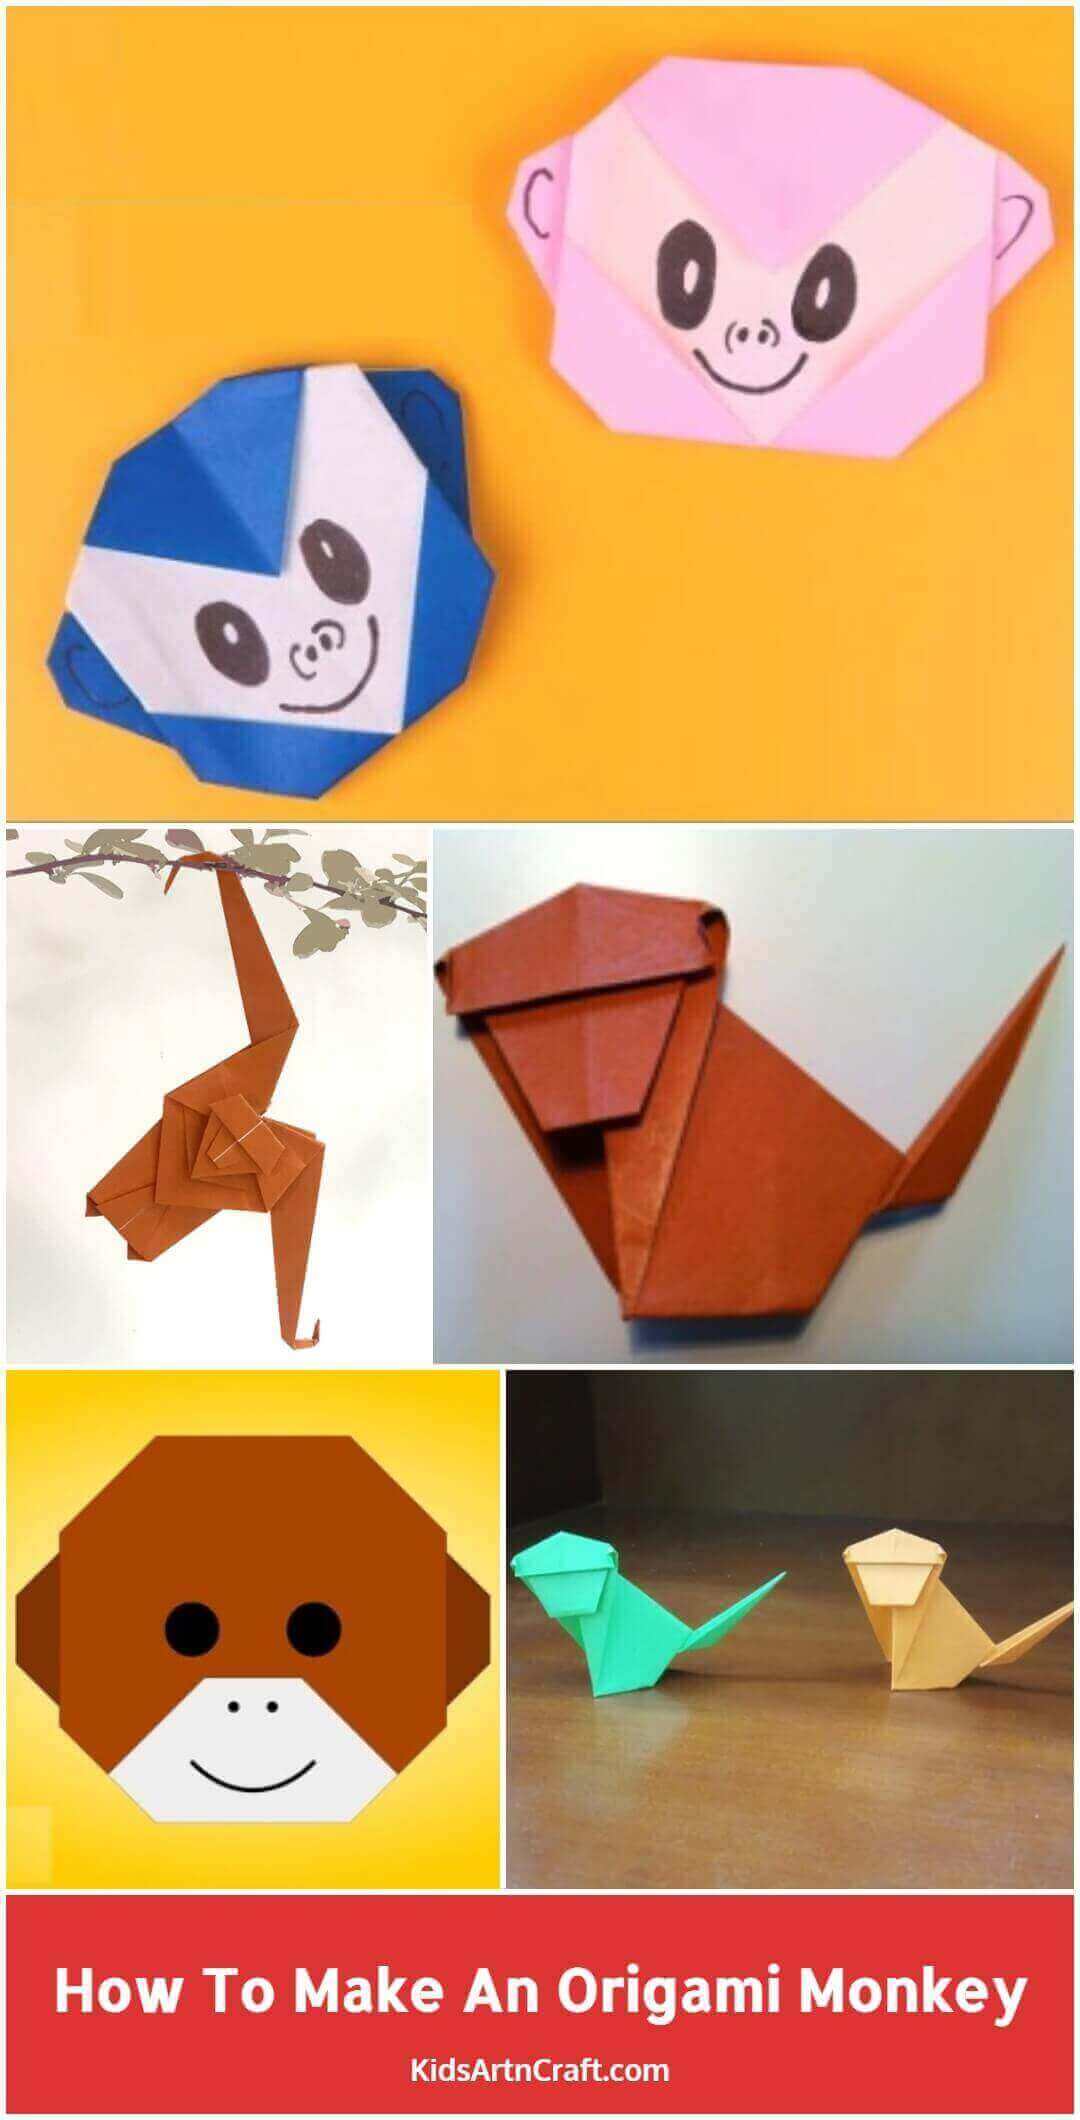 How To Make An Origami Monkey With Kids